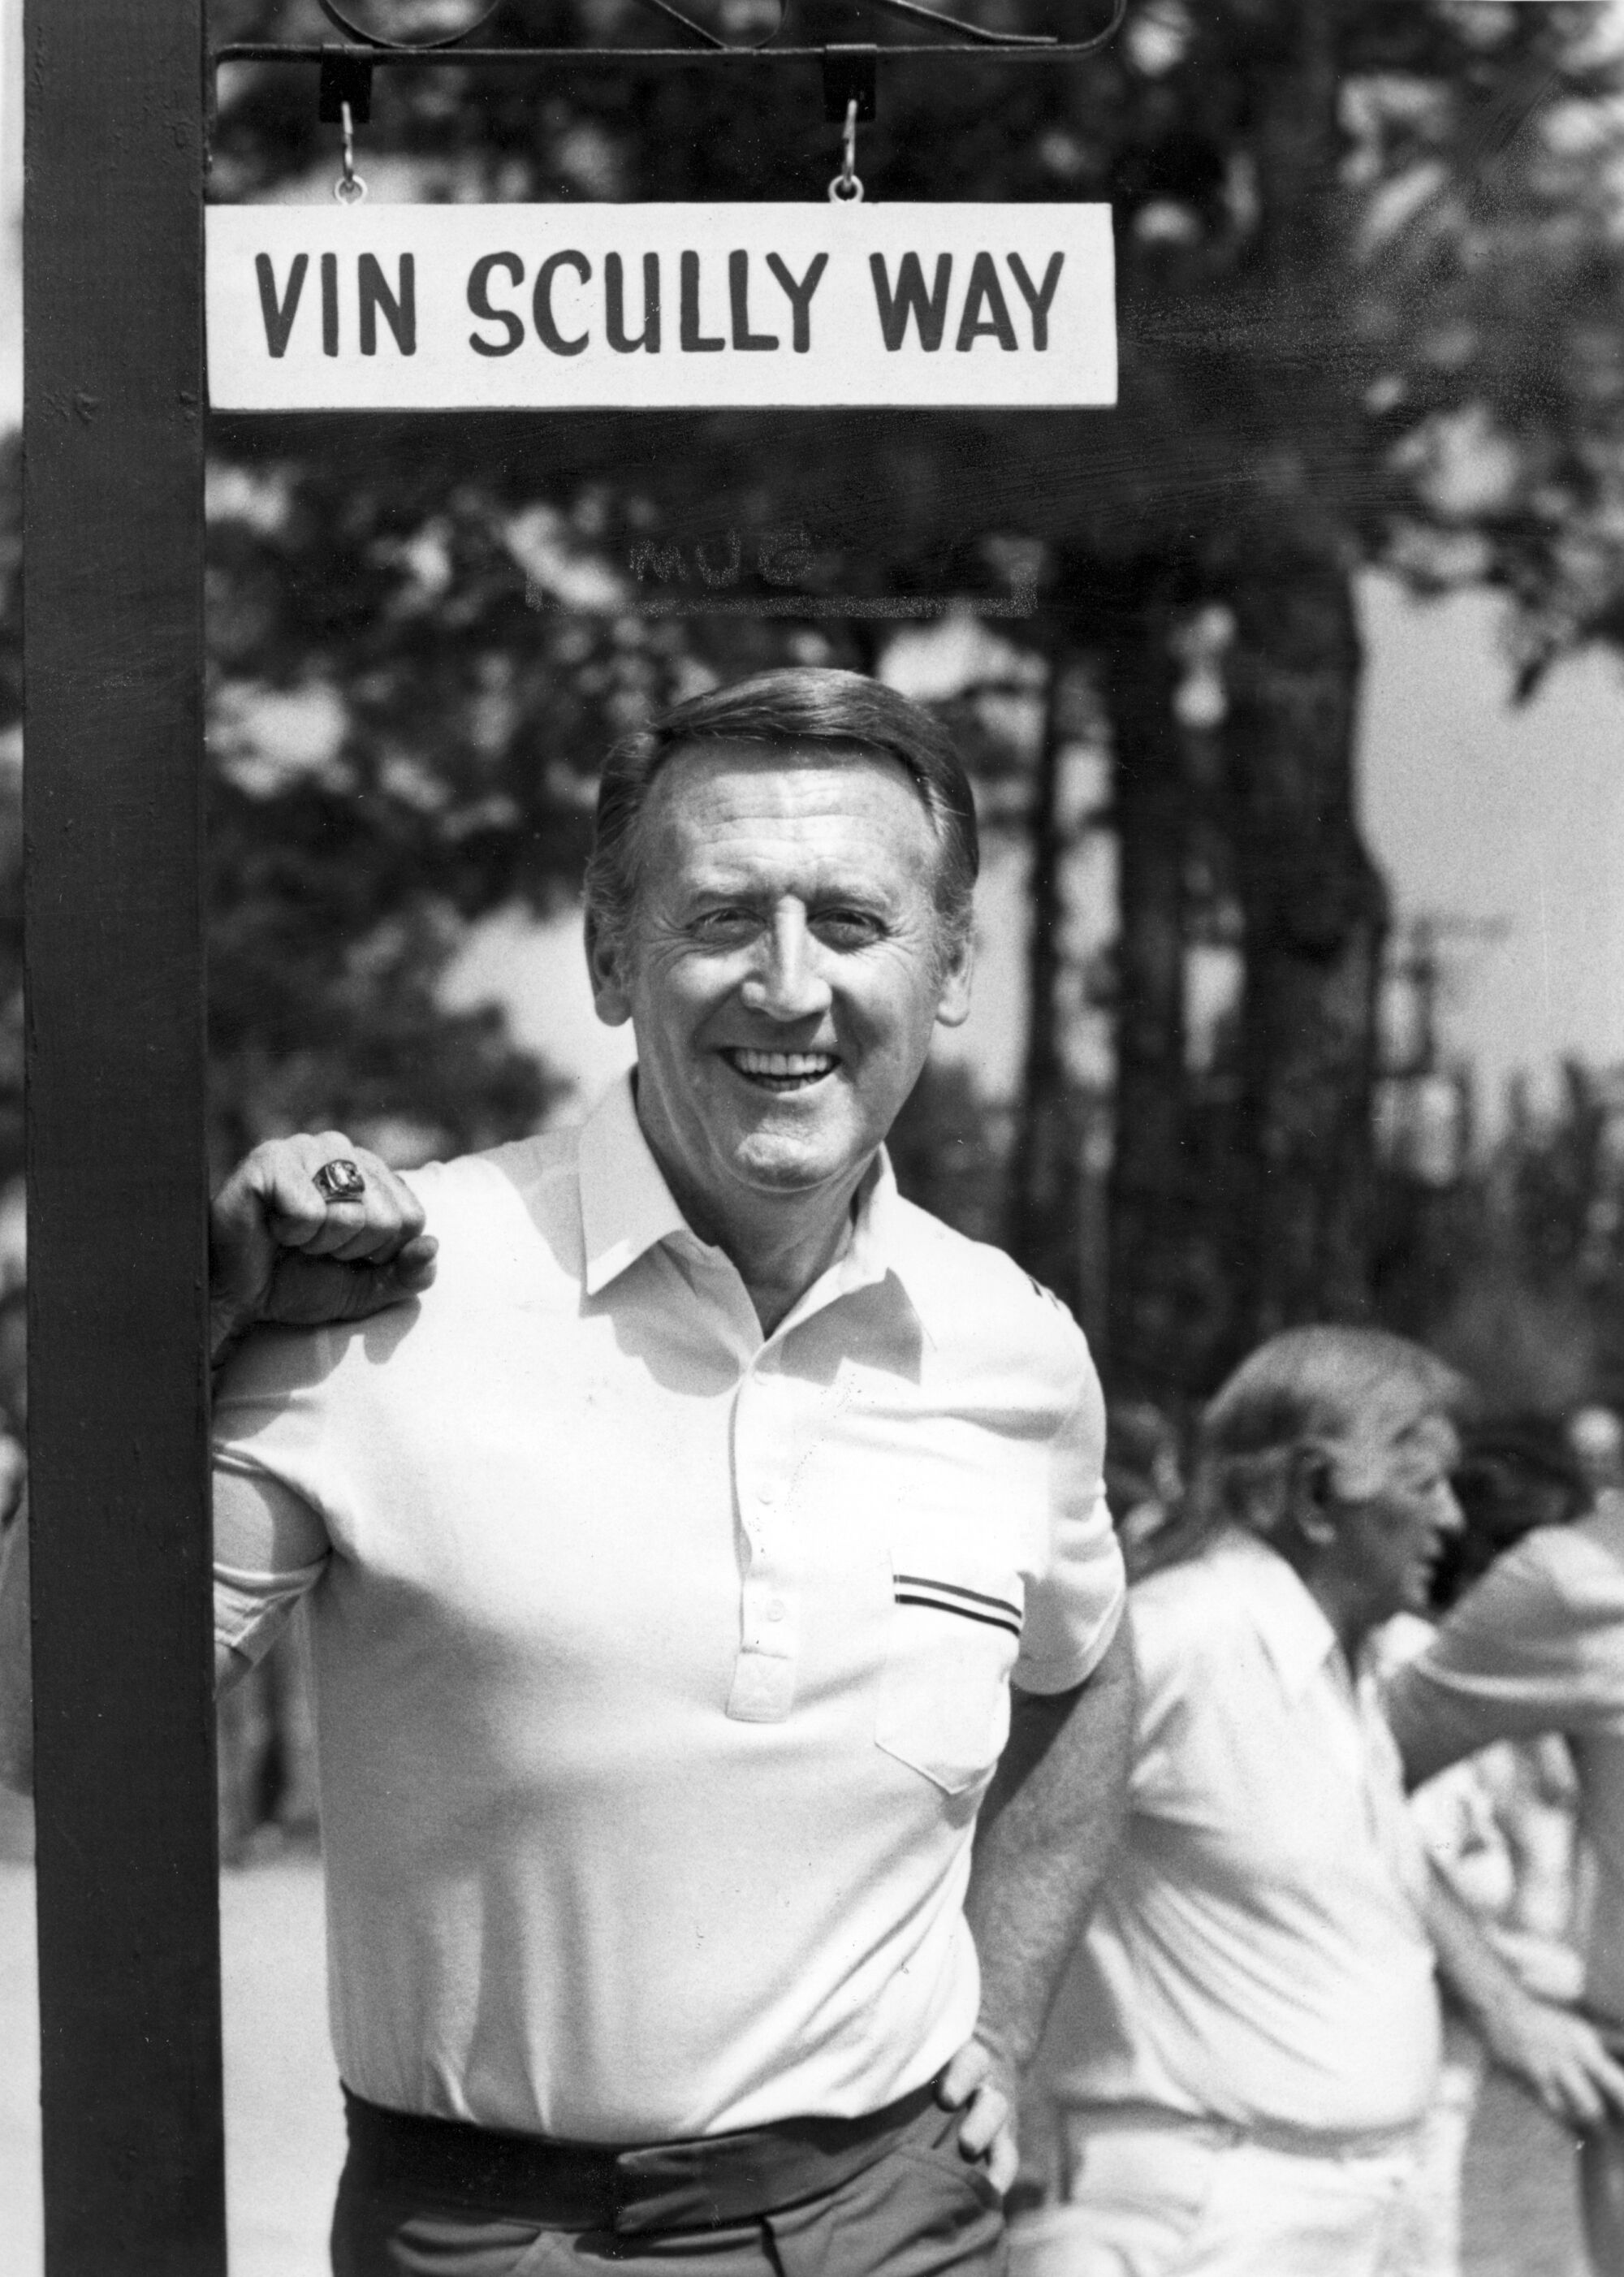 Vin Scully stands under a "Vin Scully Way" street sign at the Dodgertown spring training facility in Vero Beach, Fla.